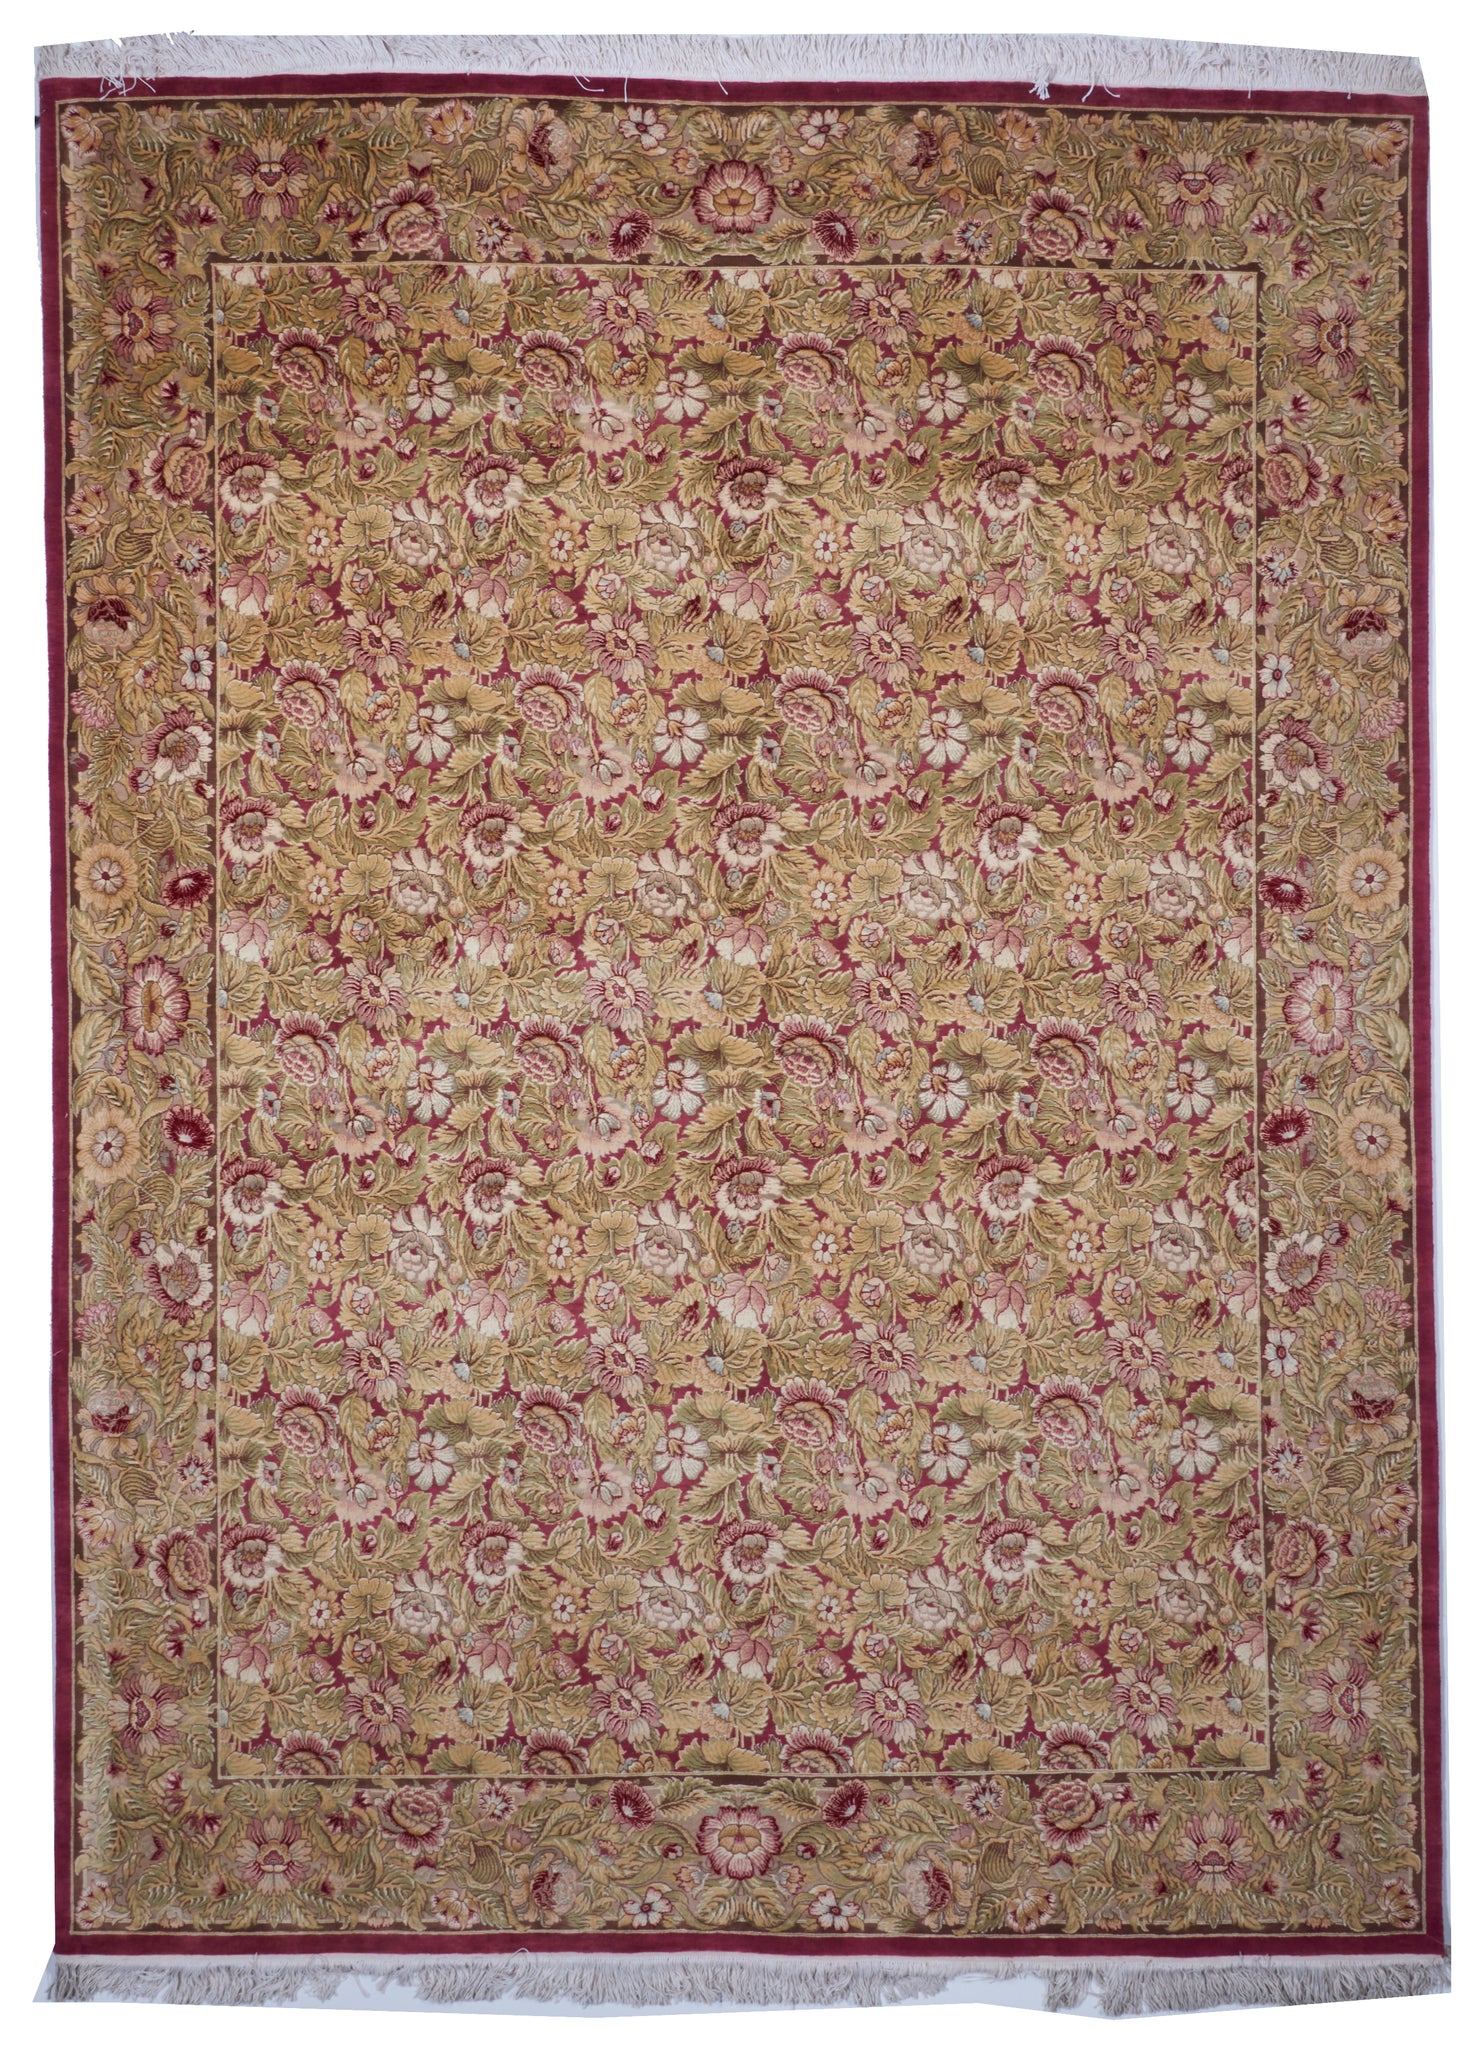 Traditional Hand Knotted Gold Pink Wool Rug 9'1 x 12'3 - IGotYourRug